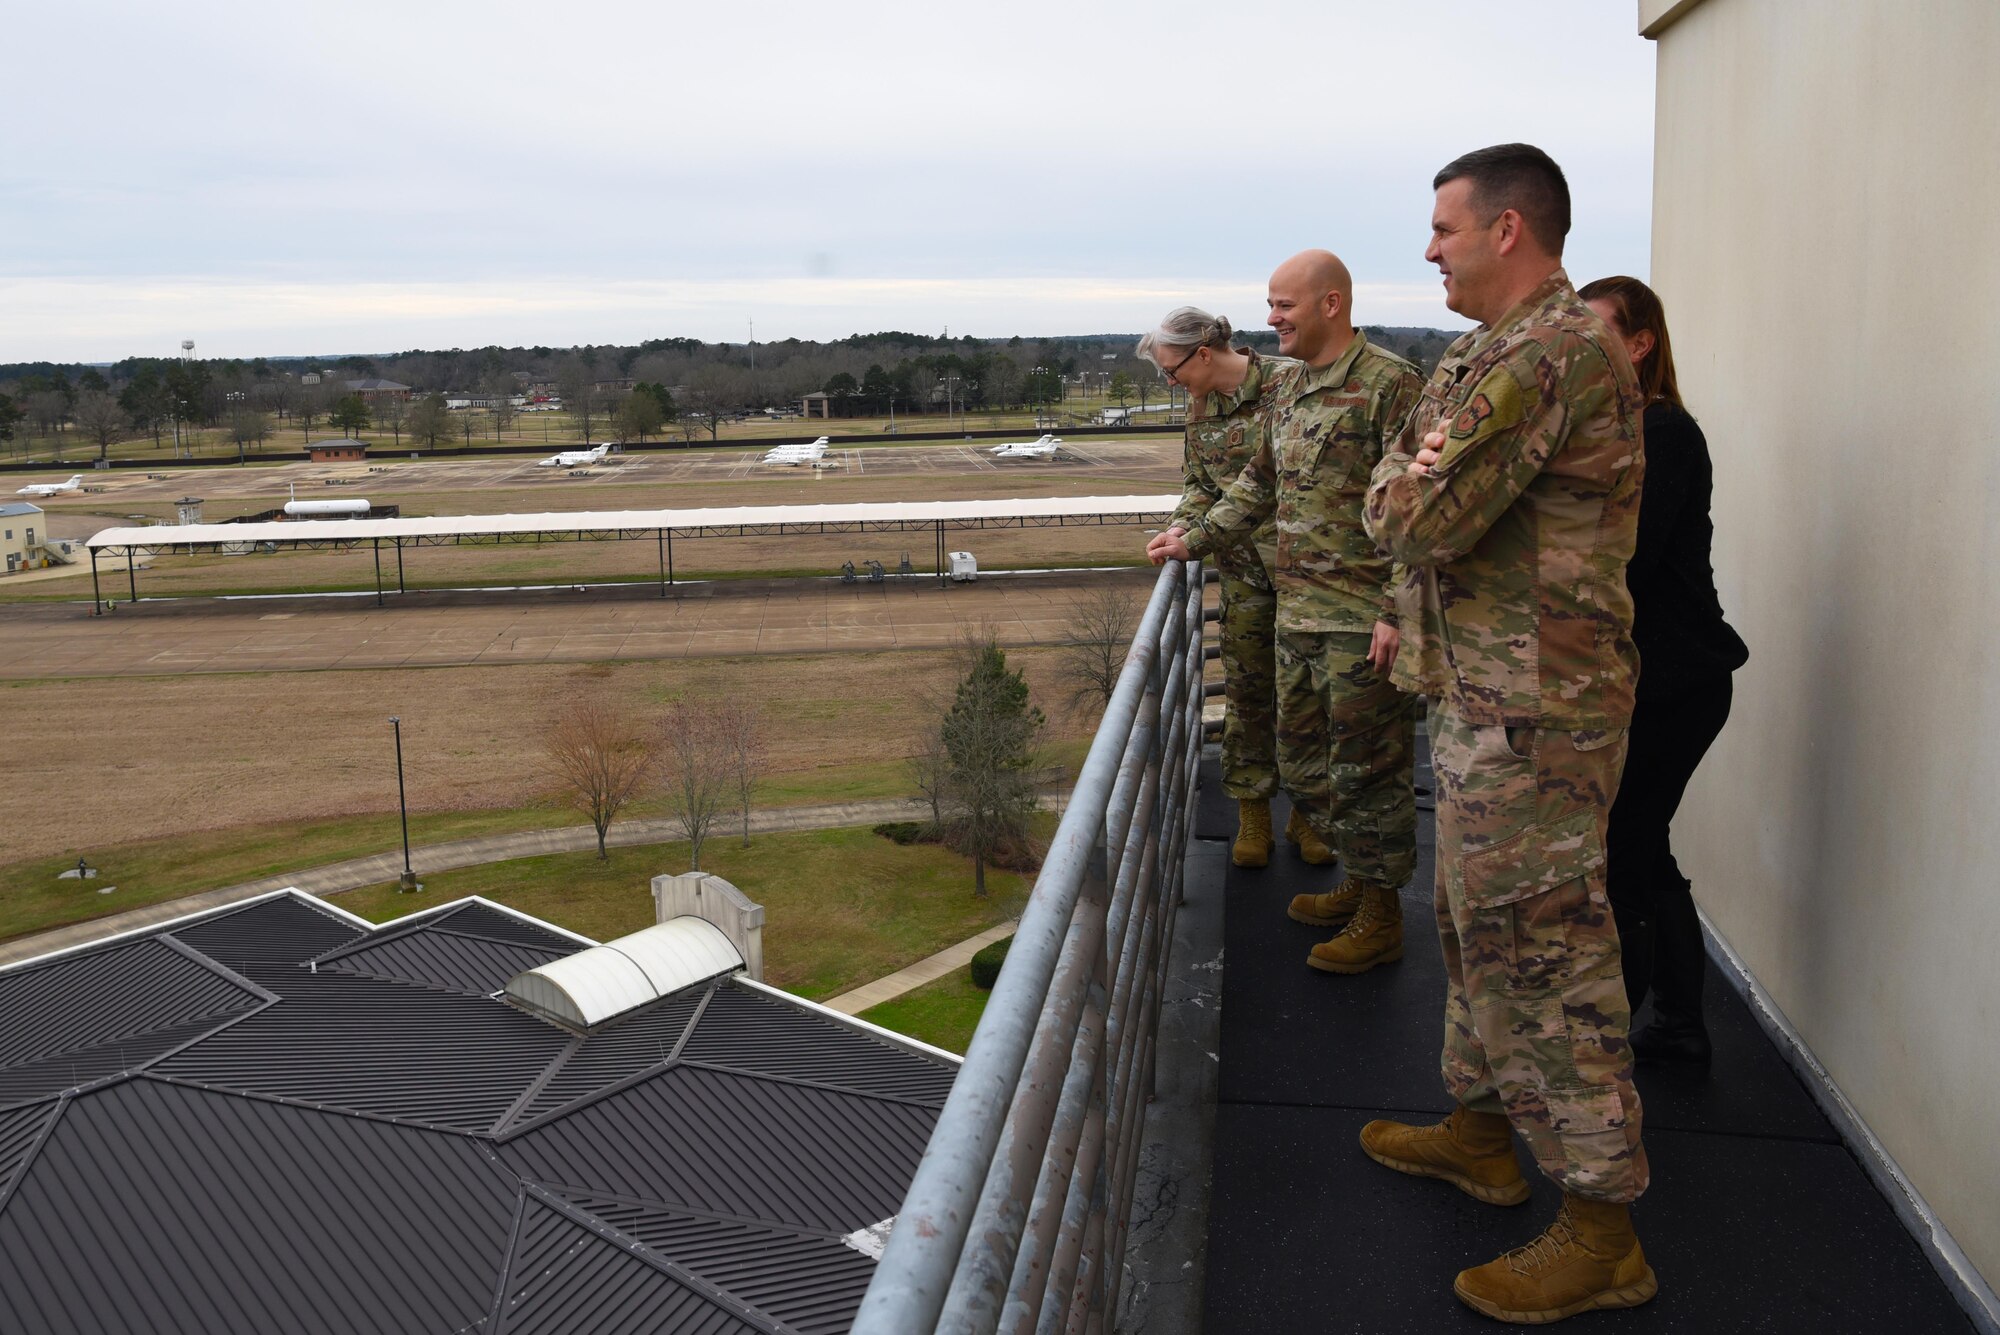 Chief Master Sgt. Trevor James, 14th Flying Training Wing command chief, tours the air traffic control tower, Jan. 16, 2020, on Columbus Air Force Base, Miss. The tower Control, and Radar Approach Control sections work closely with base aircraft and coordinate with other base agencies to keep the airfield at a high level of readiness. (U.S. Air Force photo by Airman 1st Class Jake Jacobsen)